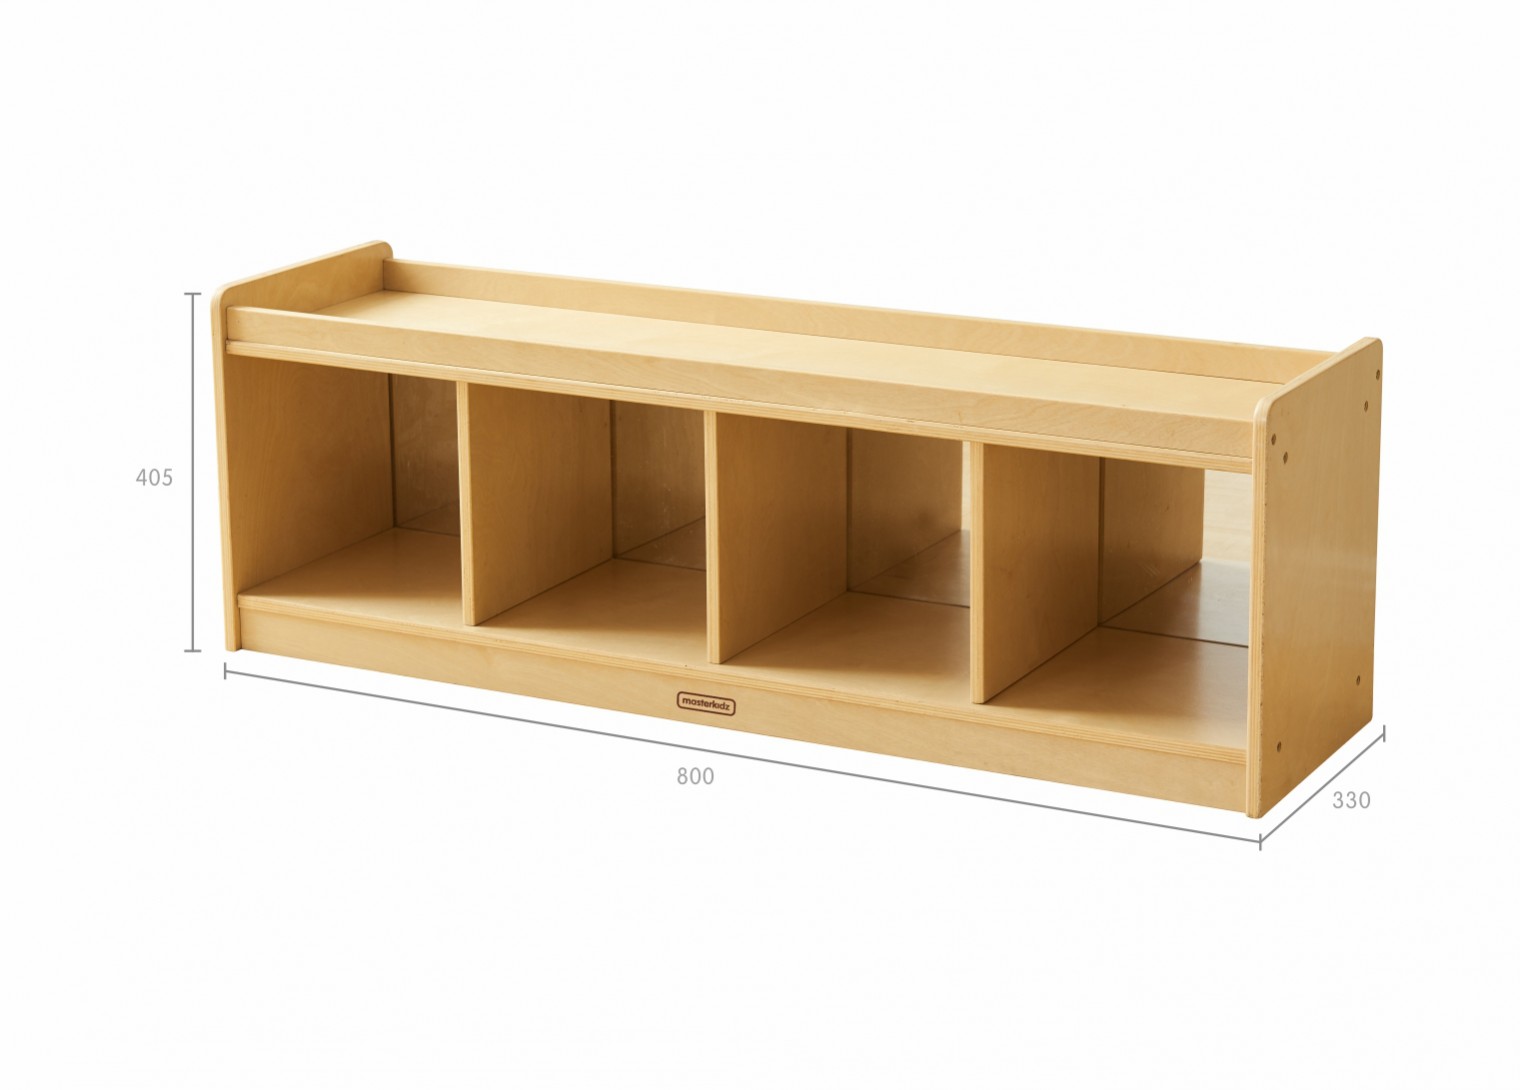 Toddler Play Center - Mirrored Back Shelving Unit